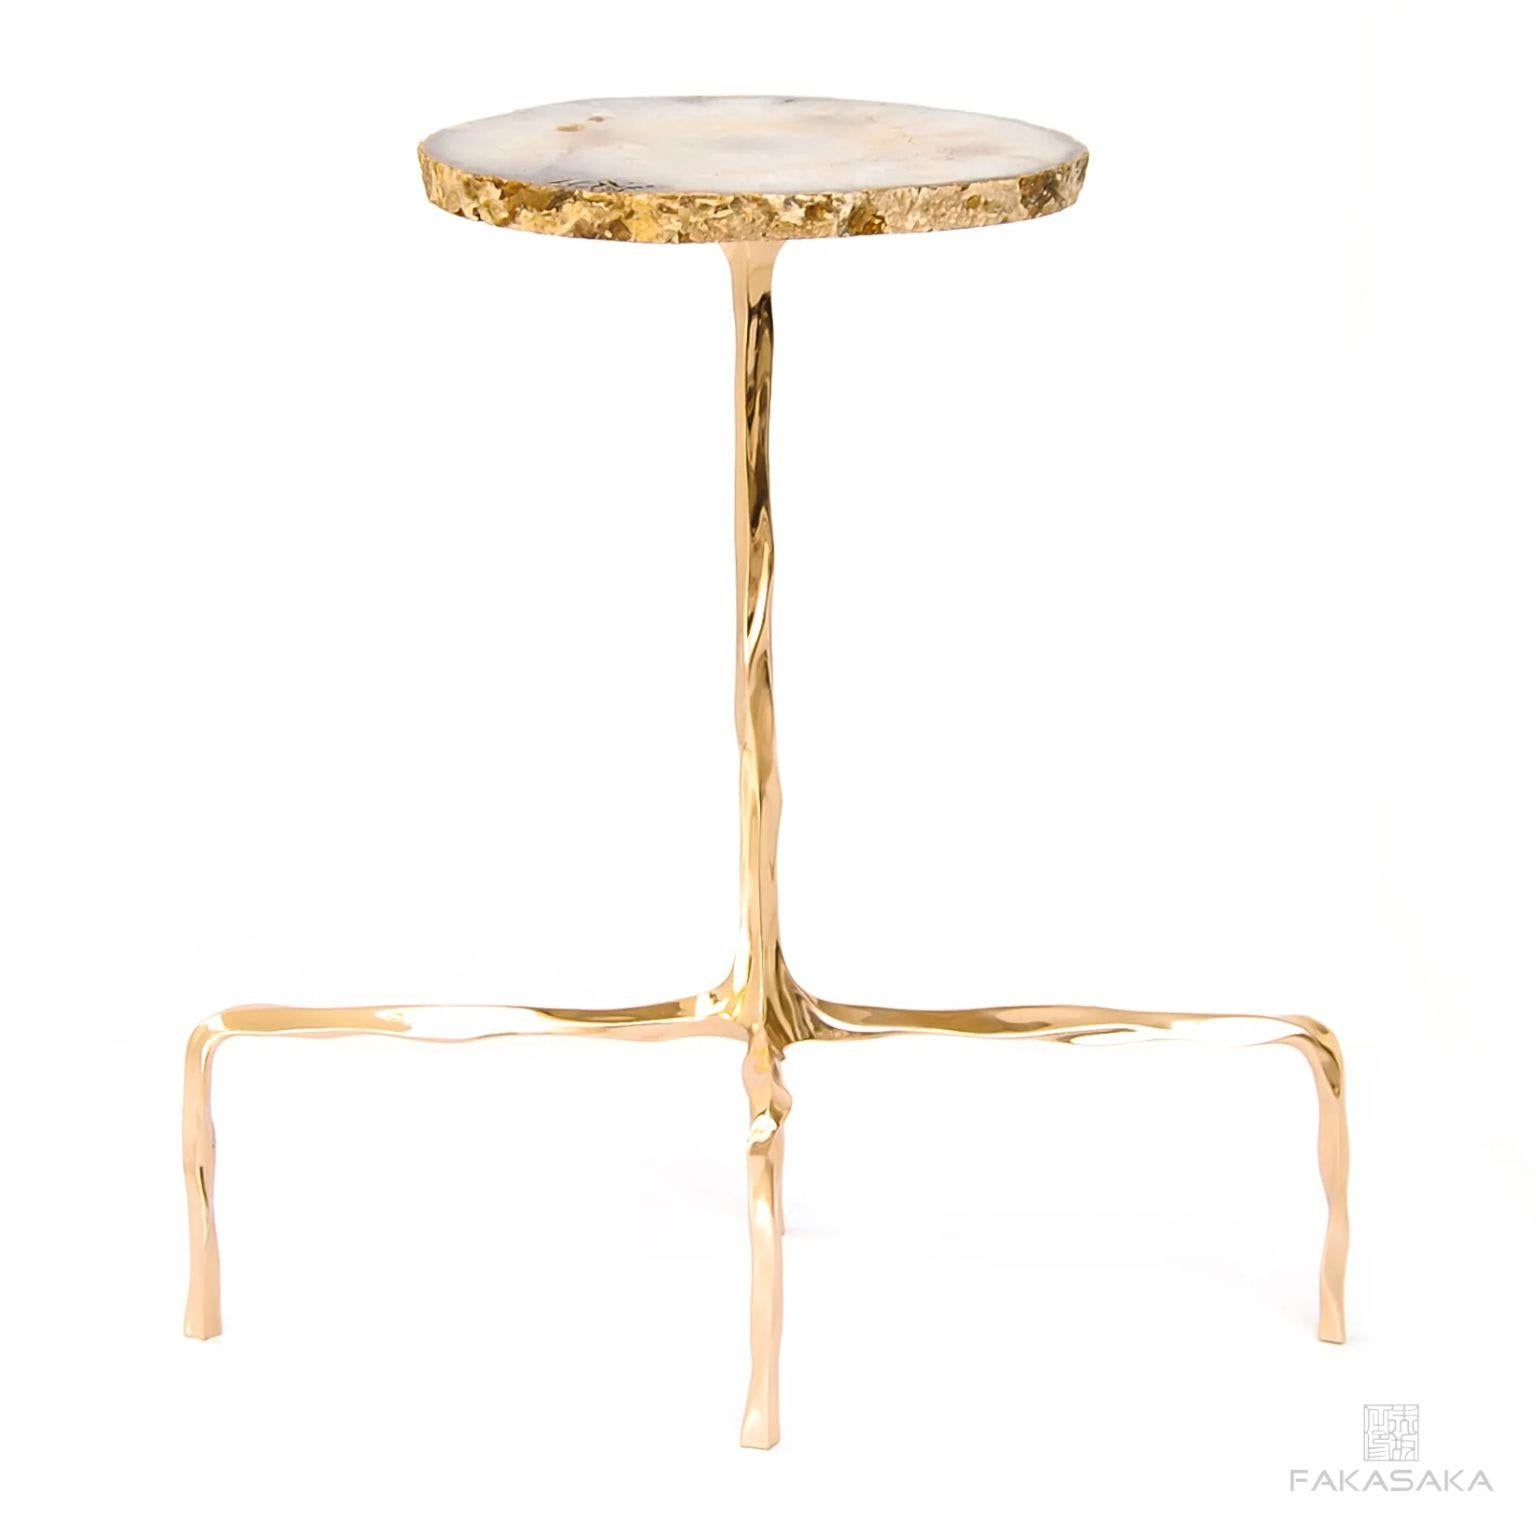 Presley drink table with Agate top by Fakasaka Design.
Dimensions: W 58 cm D 28 cm H 60 cm.
Materials: polished bronze base, Agate top.
Also available in different table top materials (Nero Marquina). 

 FAKASAKA is a design company focused on